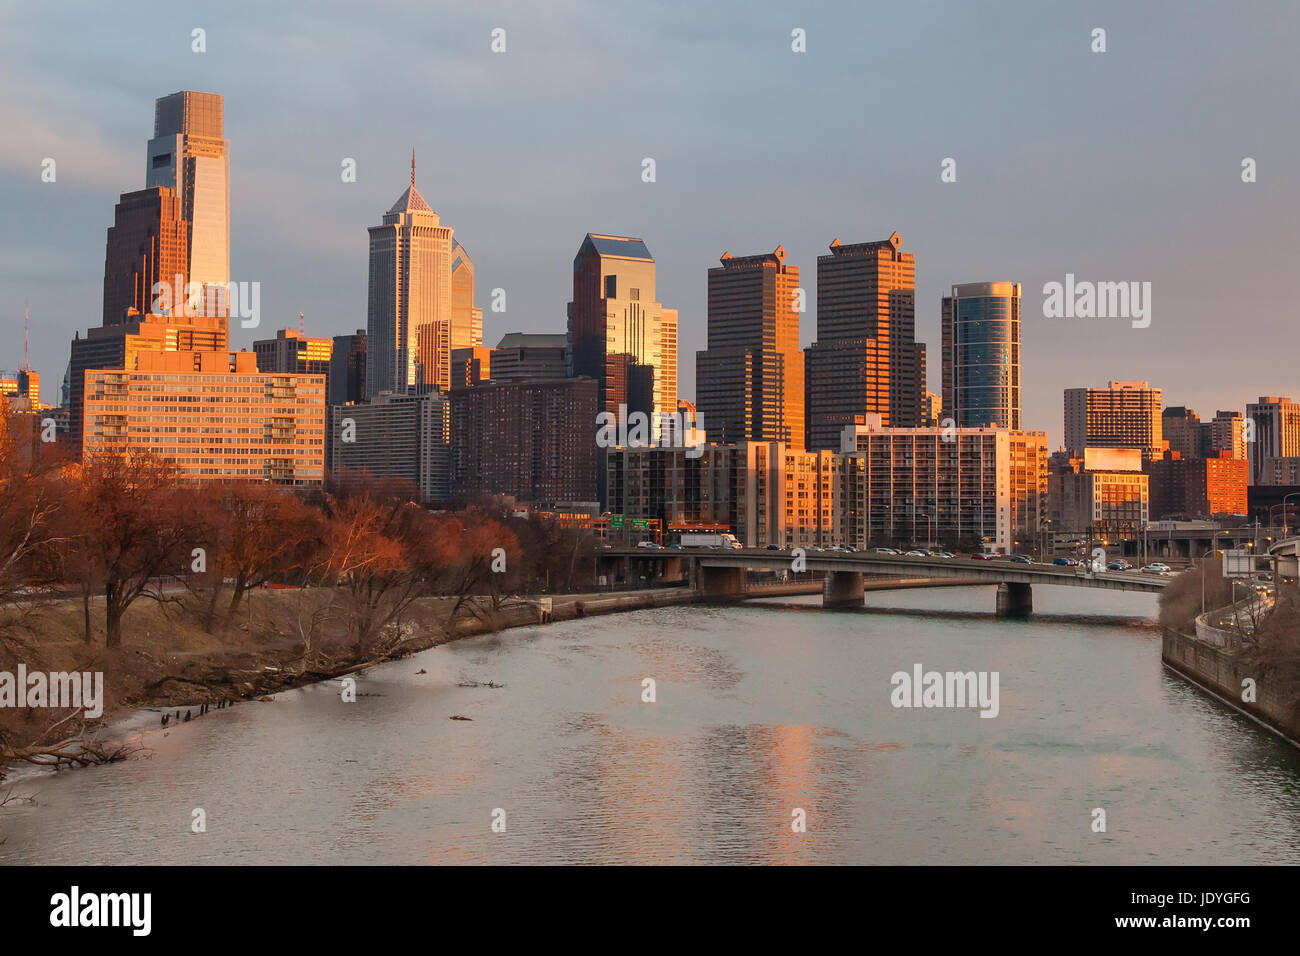 Skyline of center city Philadelphia at sunset with Schuylkill River in foreground Stock Photo